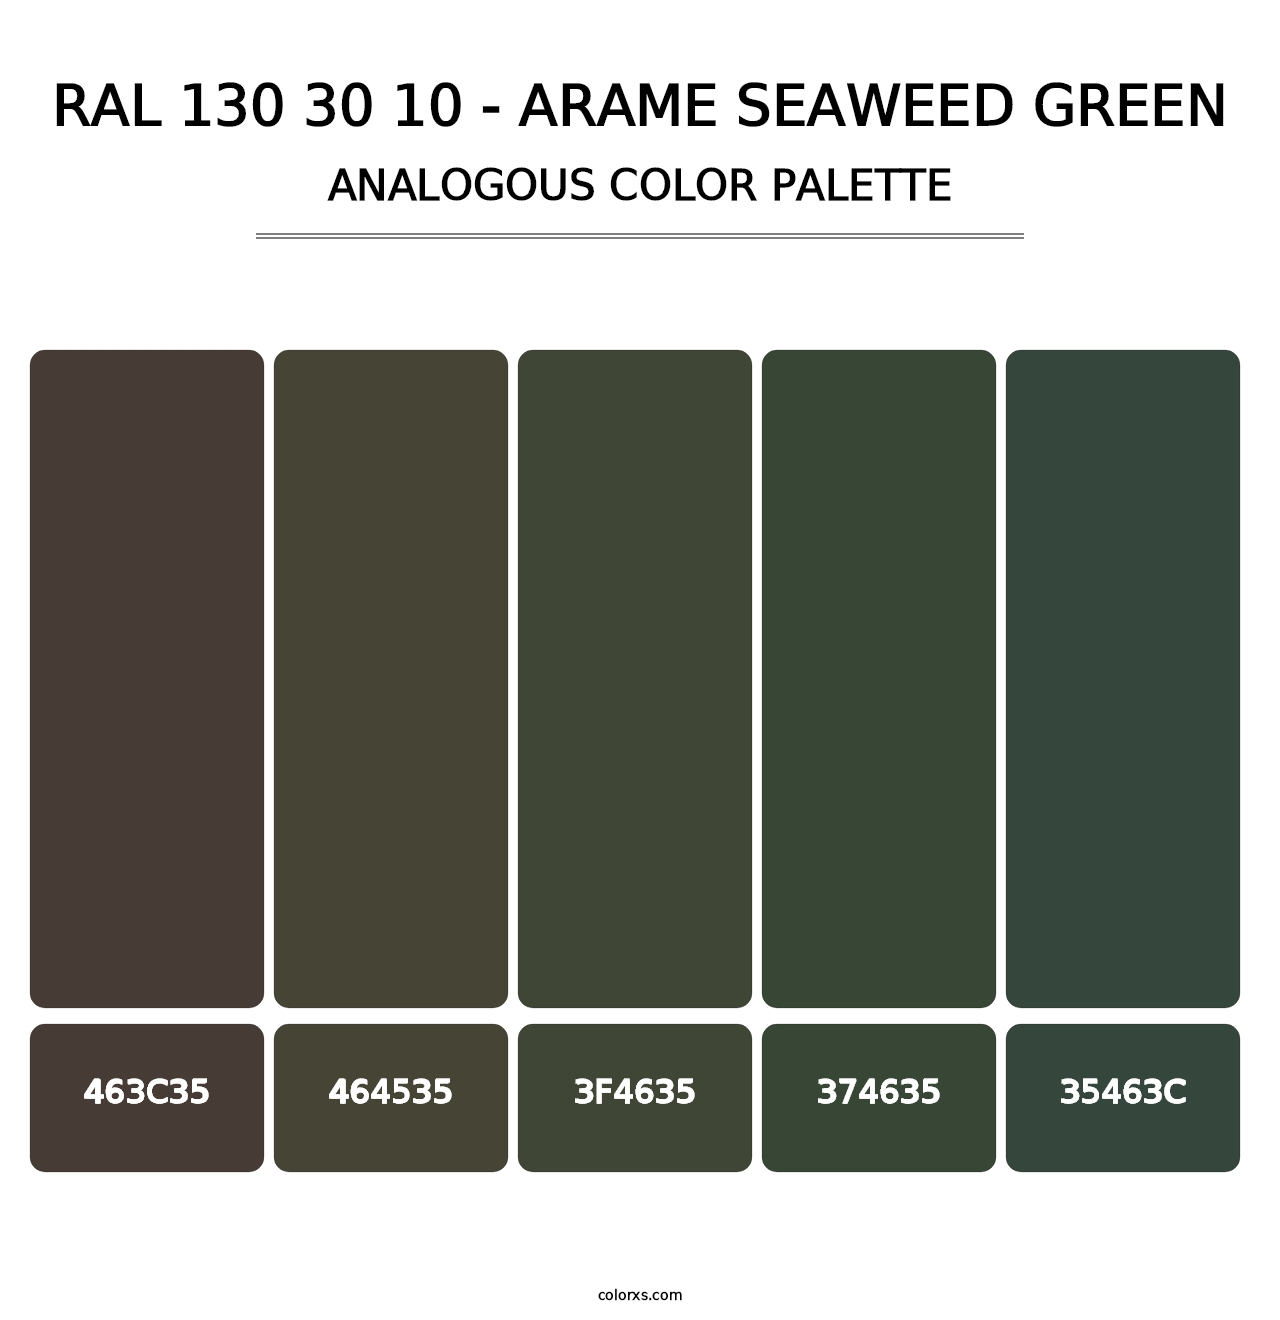 RAL 130 30 10 - Arame Seaweed Green - Analogous Color Palette